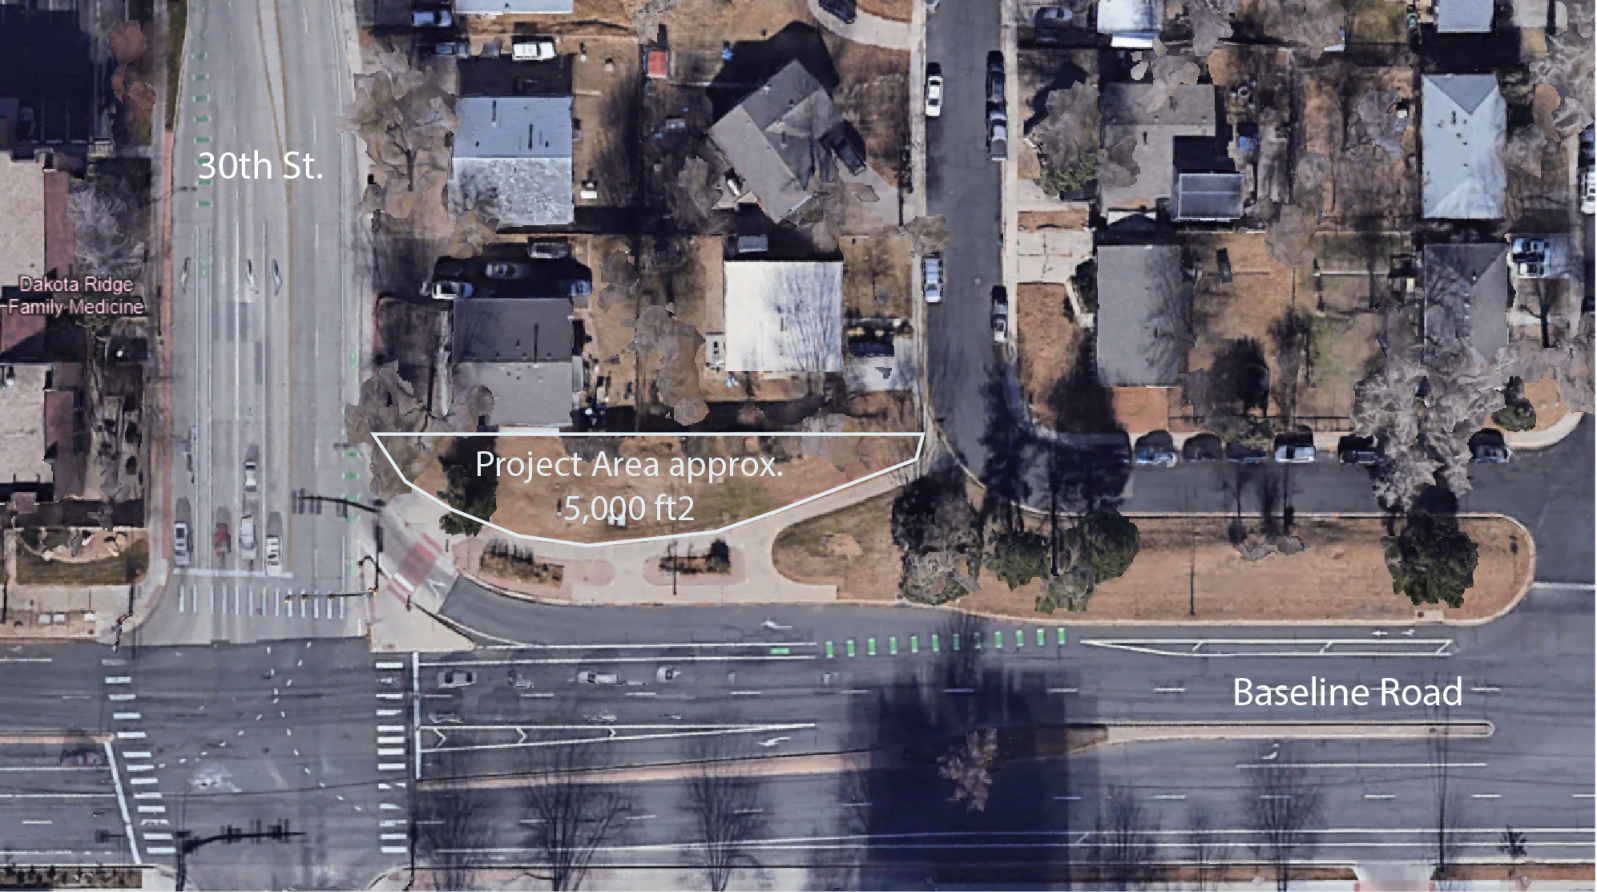 Aerial shot of project location, a section of 5000 square feet of grass at the corner of an intersection next to two houses